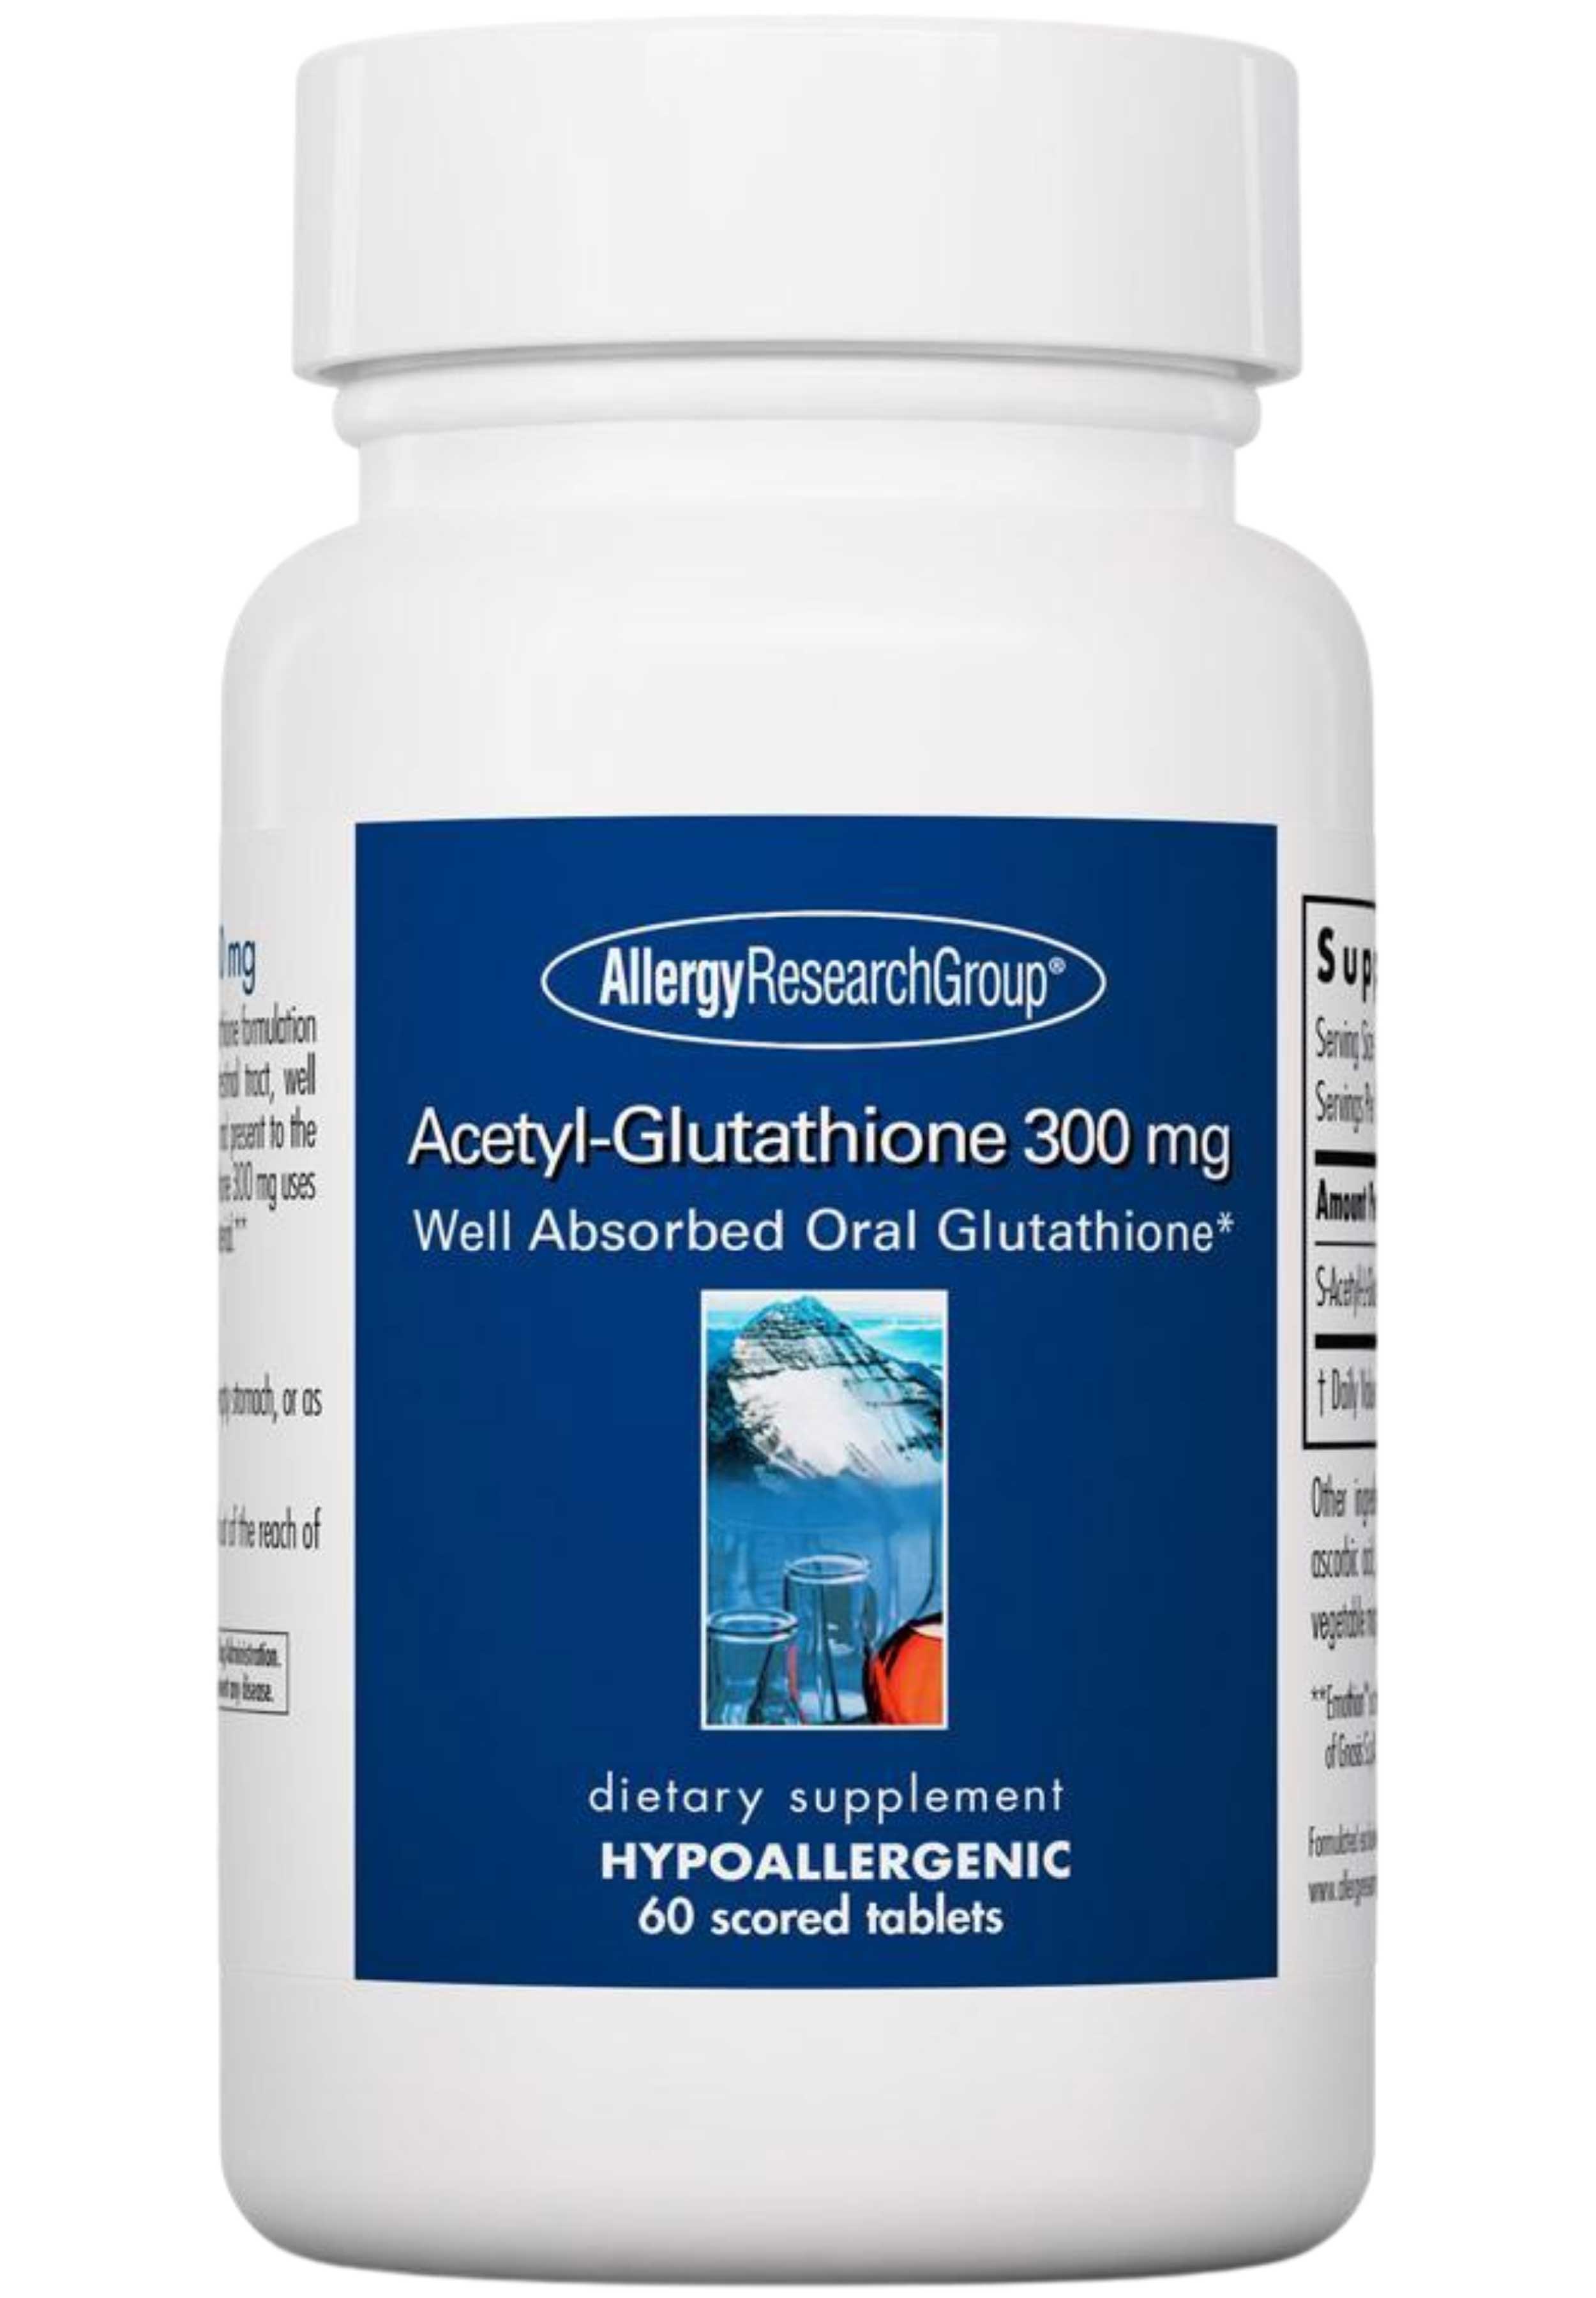 Allergy Research Group Acetyl-Glutathione 300 mg